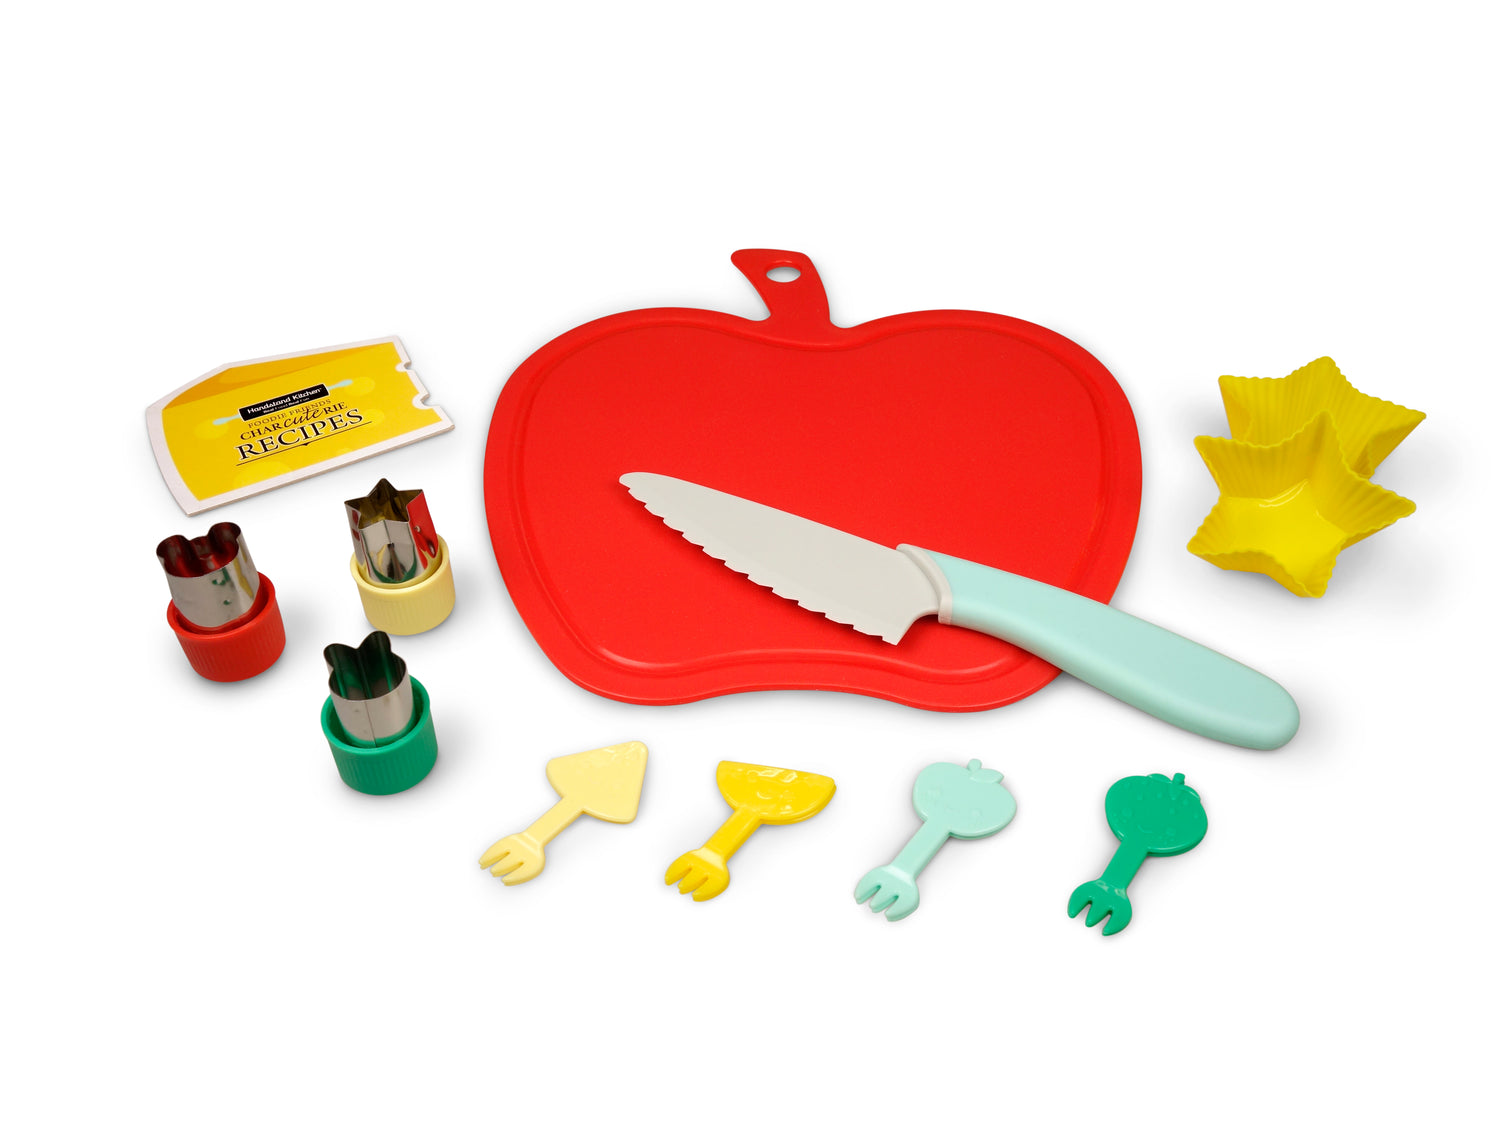 Out of box image of Foodie Friends CHARcuteRIE Set containing : 1 apple cutting board, 1 child-safe serrated knife, 2 silicone  snack cups, 3 fruit/vegetable cutters, 8 fruit/vegetable picks and recipes.